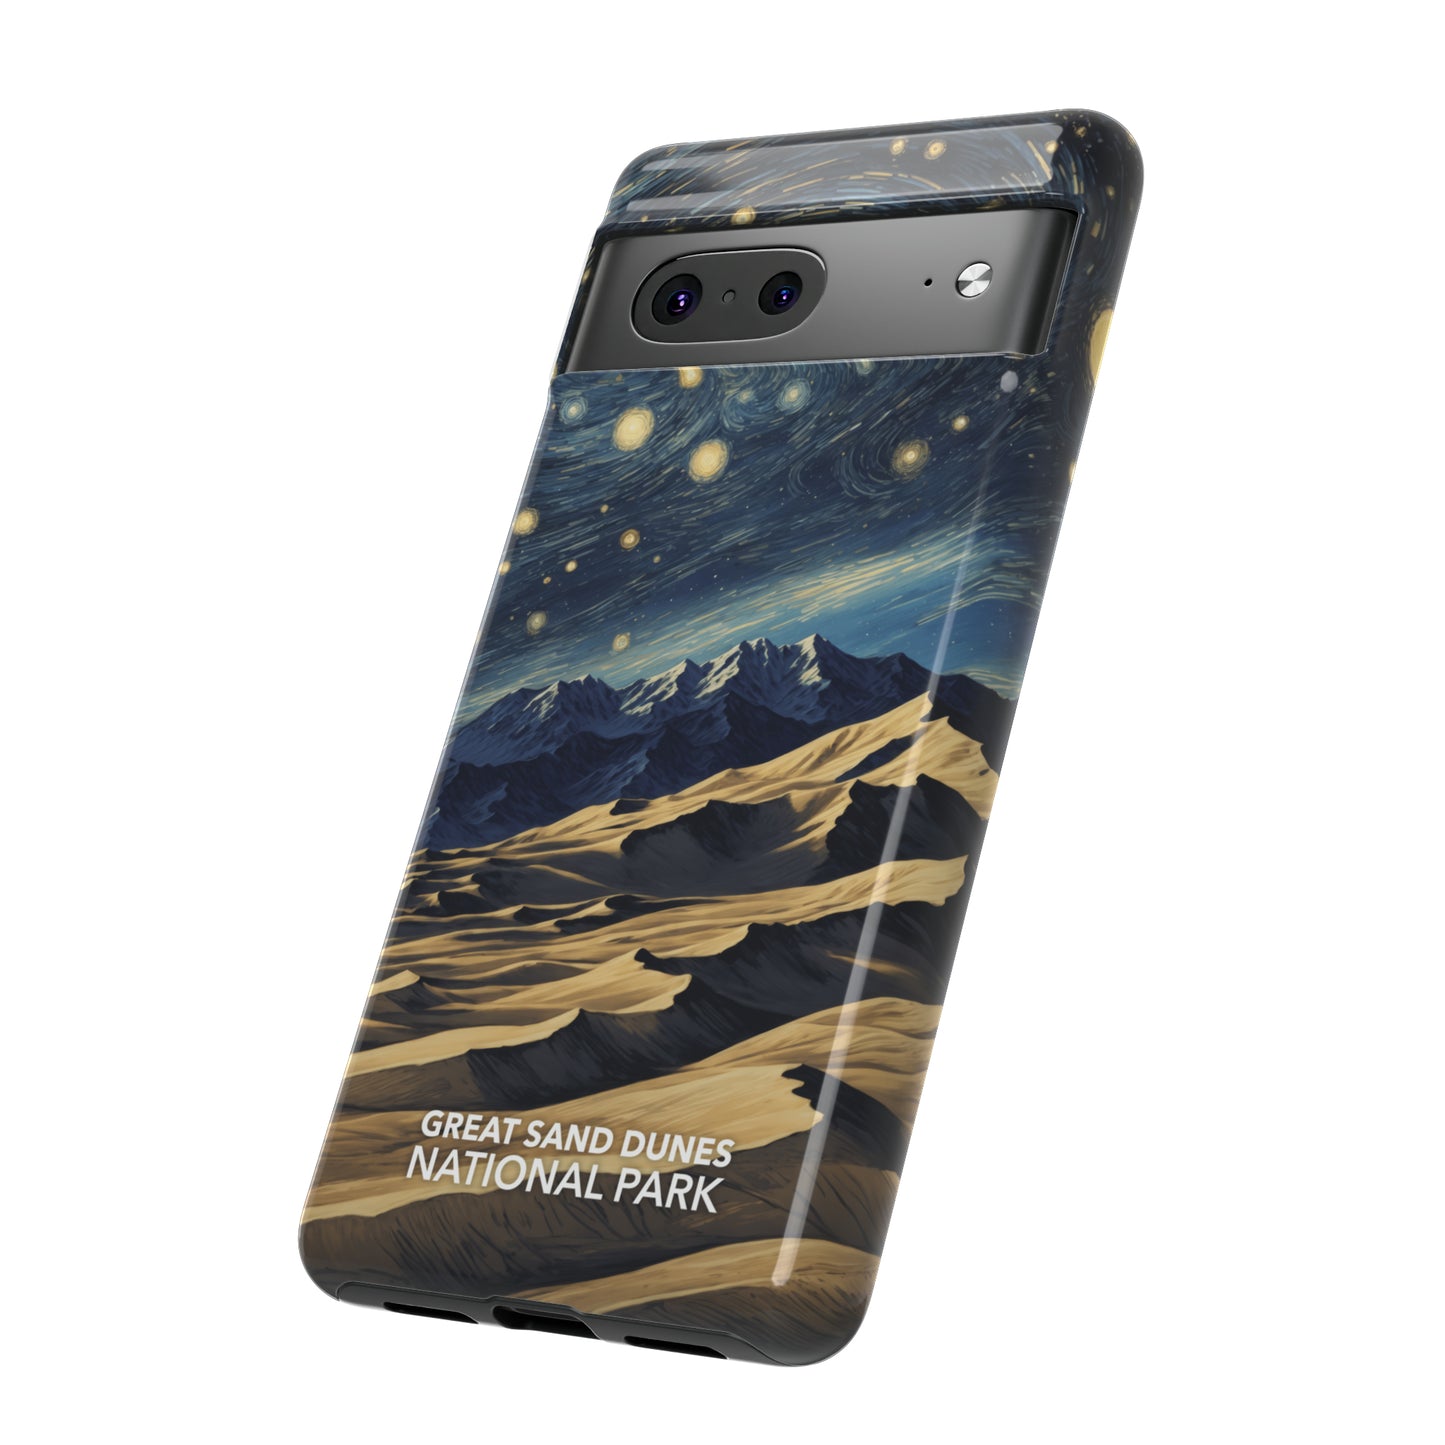 Great Sand Dunes National Park Phone Case - Starry Night